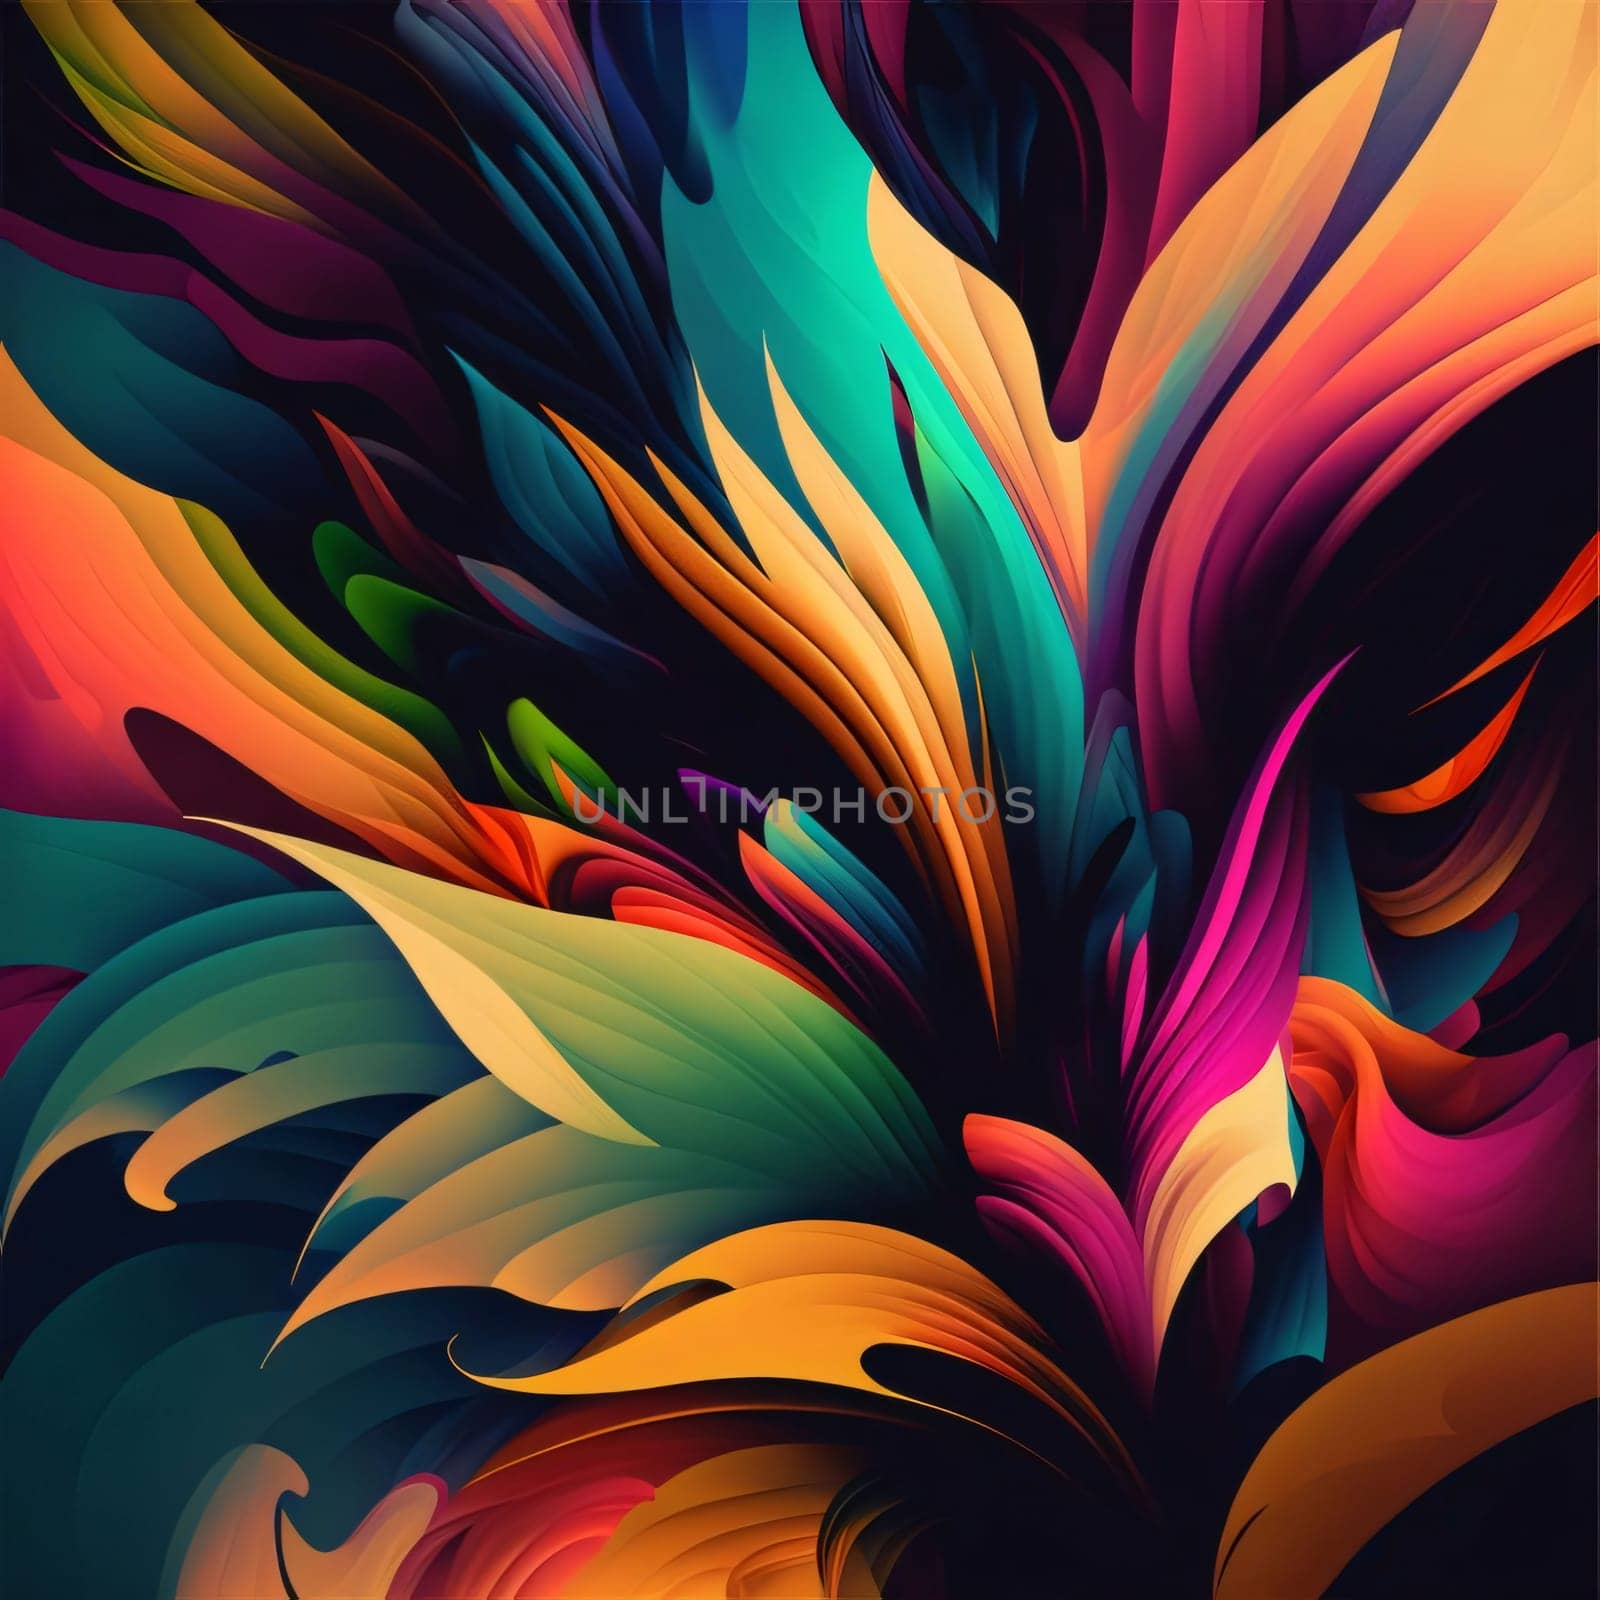 Abstract background design: Abstract colorful background with swirls. Vector illustration. Eps 10.